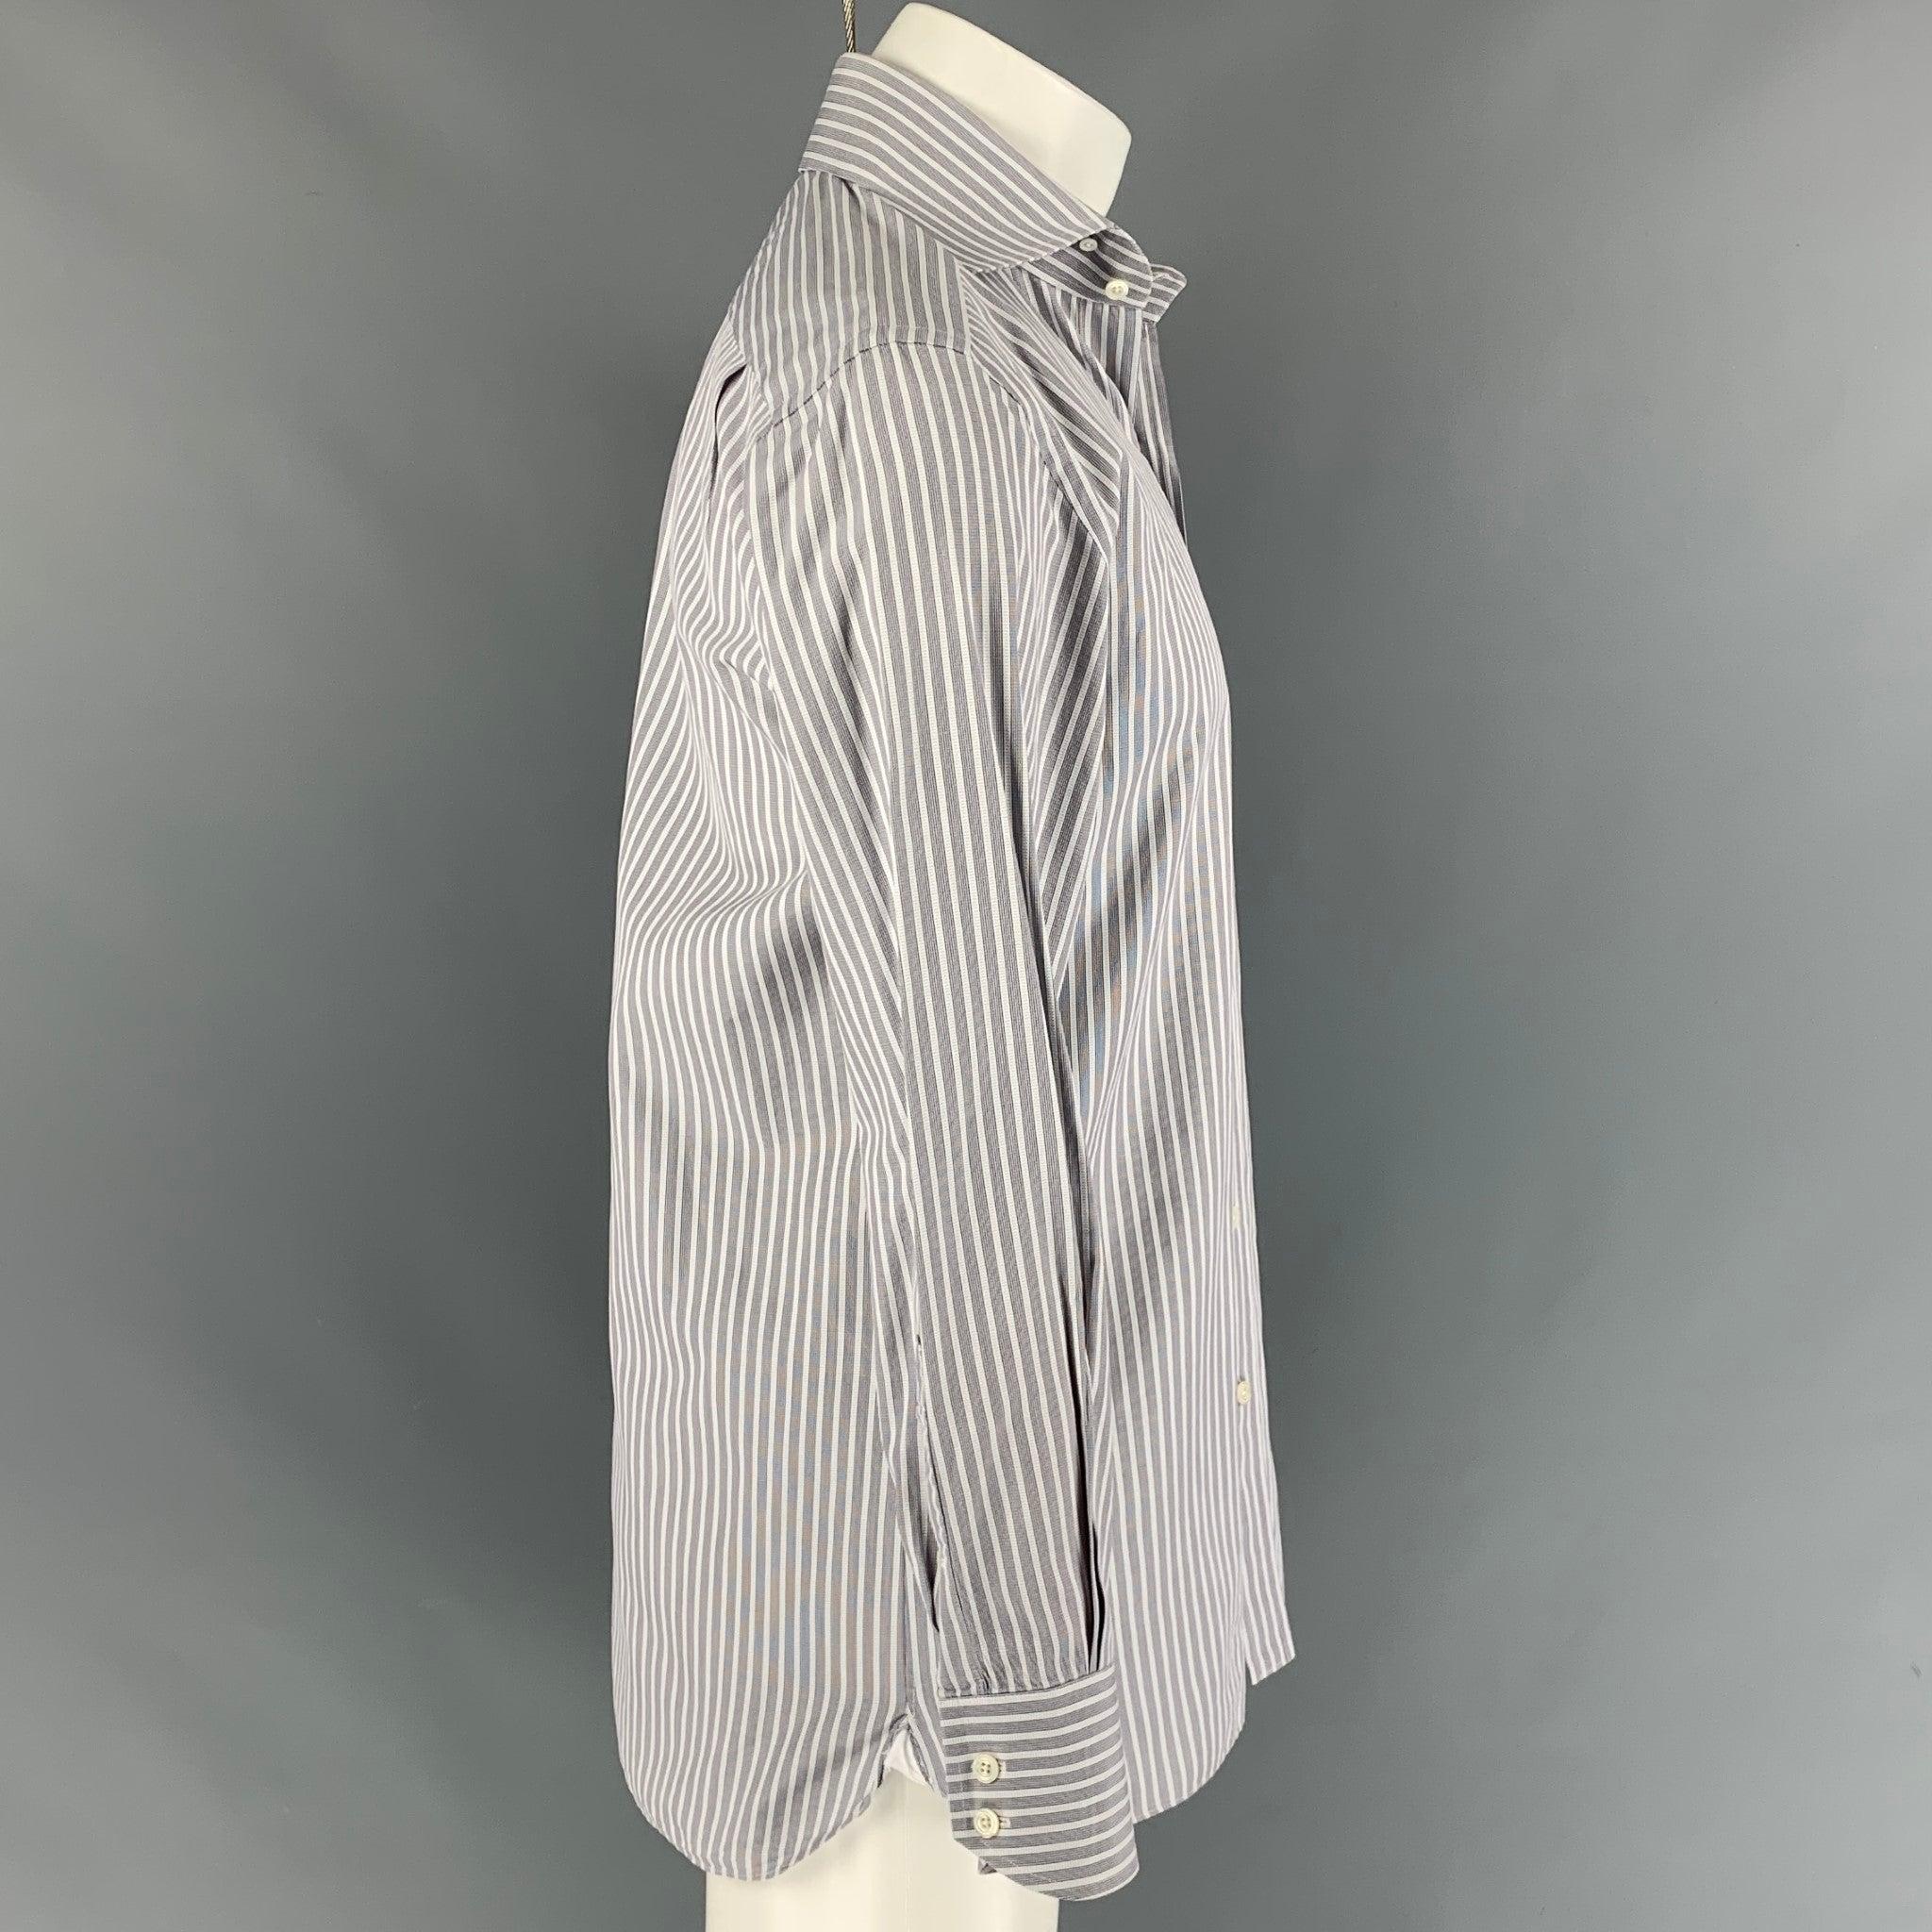 TOM FORD long sleeve shirt comes in a grey striped cotton featuring a spread collar and a buttoned closure. Made in Switzerland.
Excellent
Pre-Owned Condition. 

Marked:   40 - 15 3/4 

Measurements: 
 
Shoulder: 18 inches  Chest: 40 inches  Sleeve: